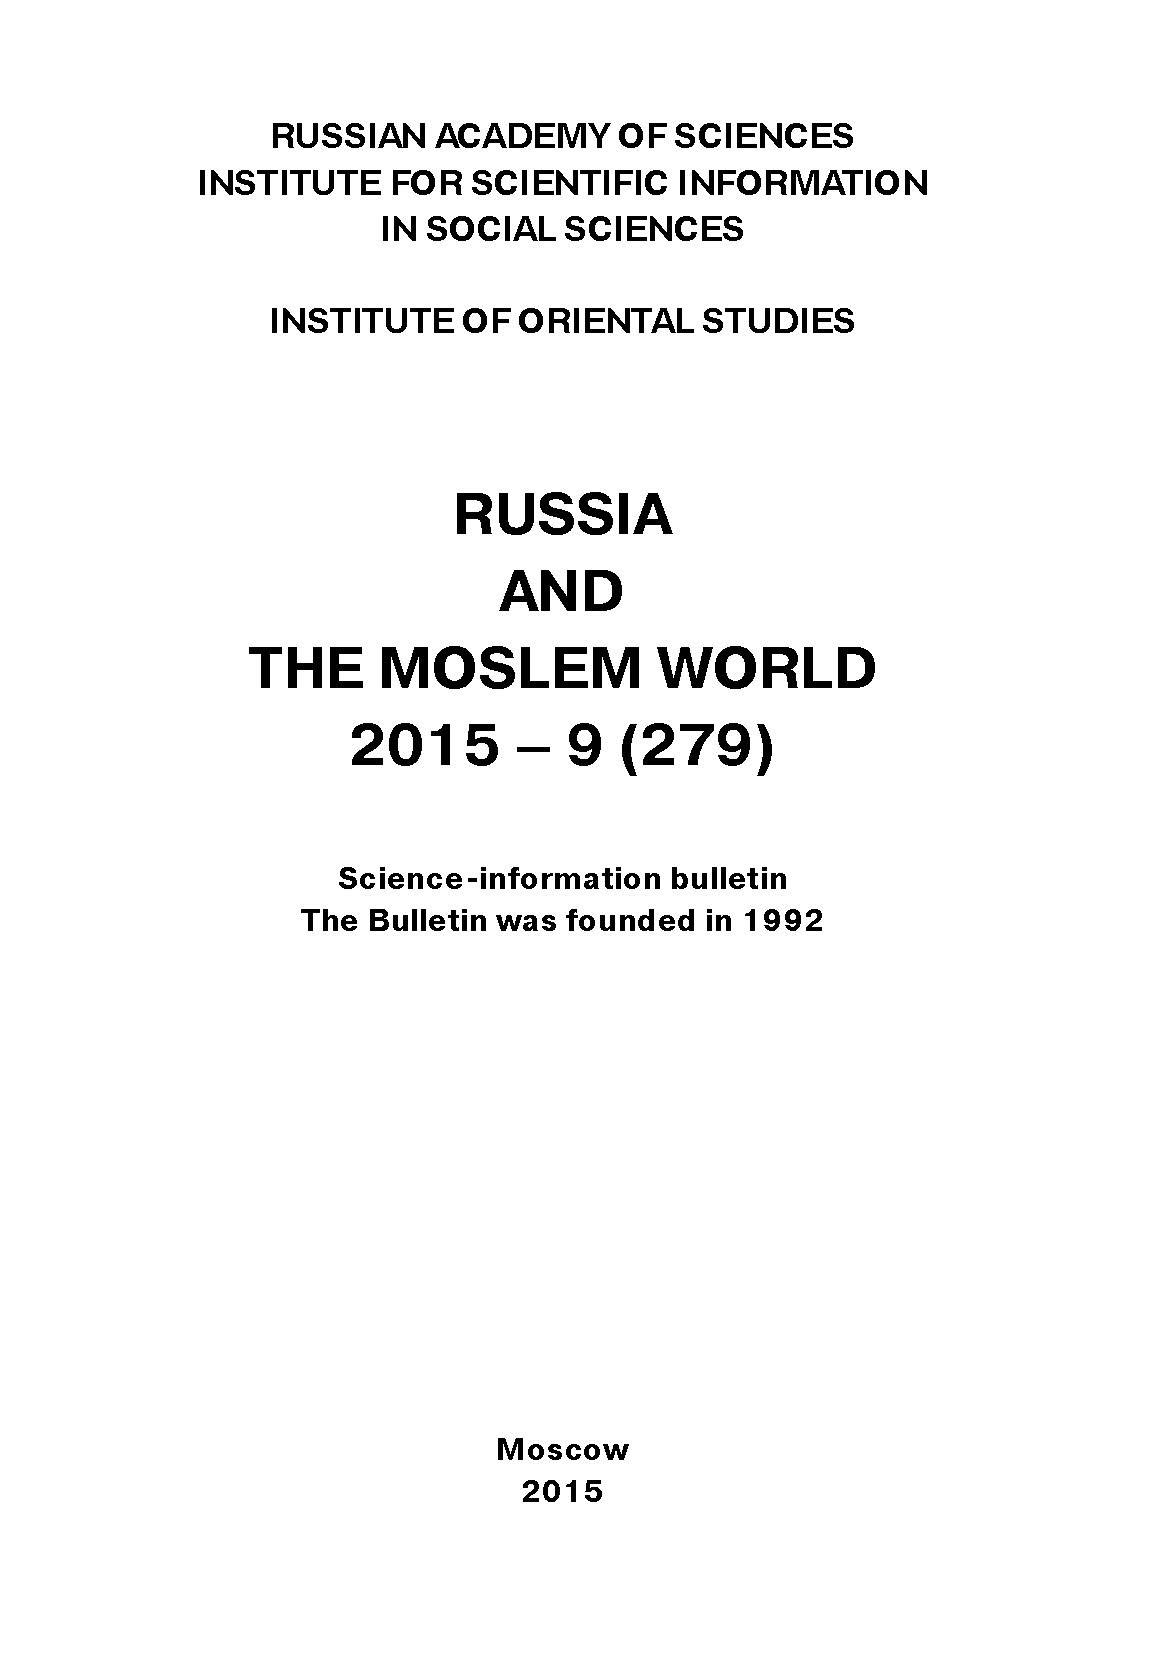 Russia and the Moslem World№ 09 / 2015